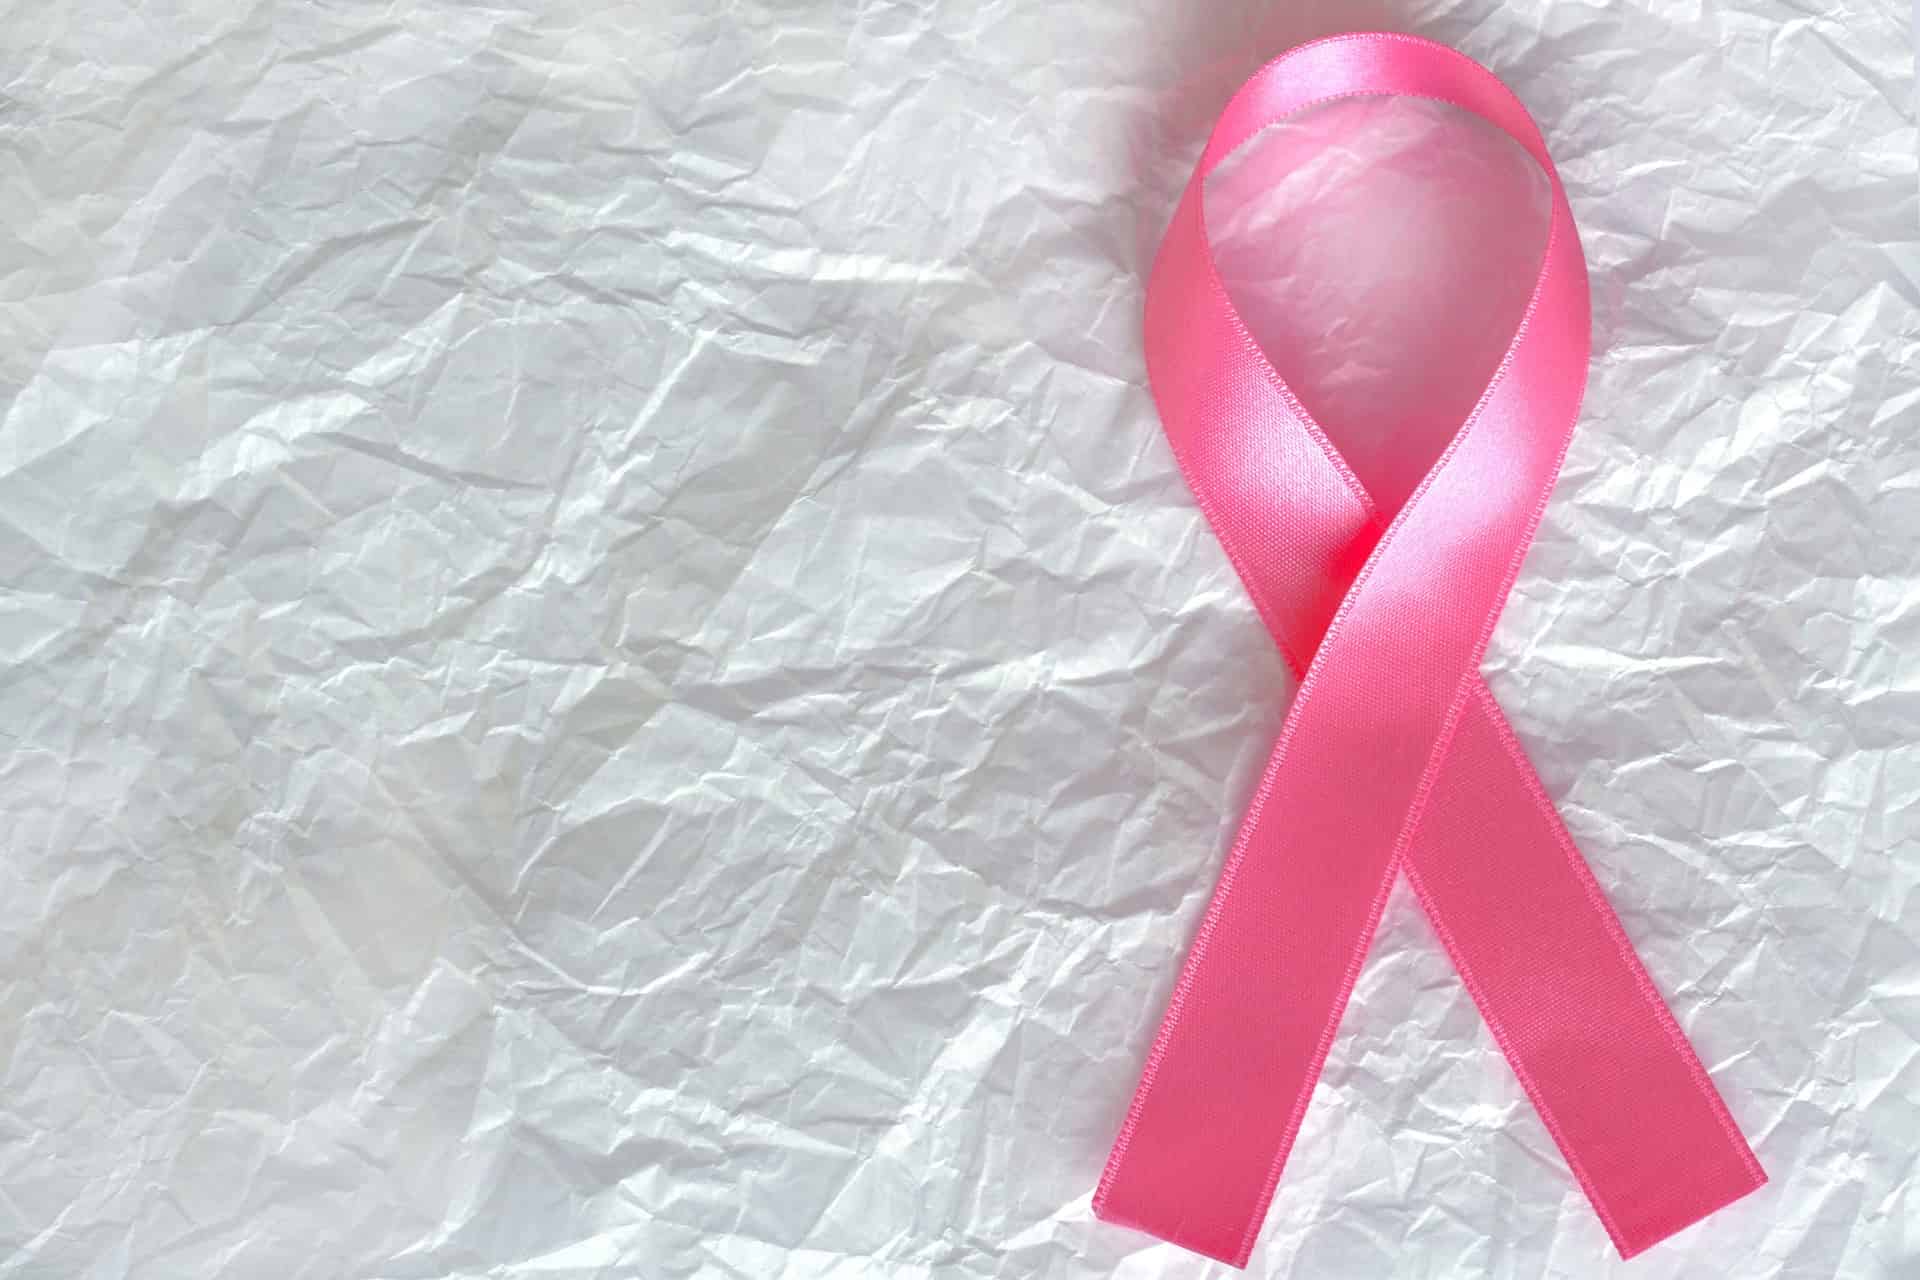 Researchers turn breast cancer cells into less harmful ones